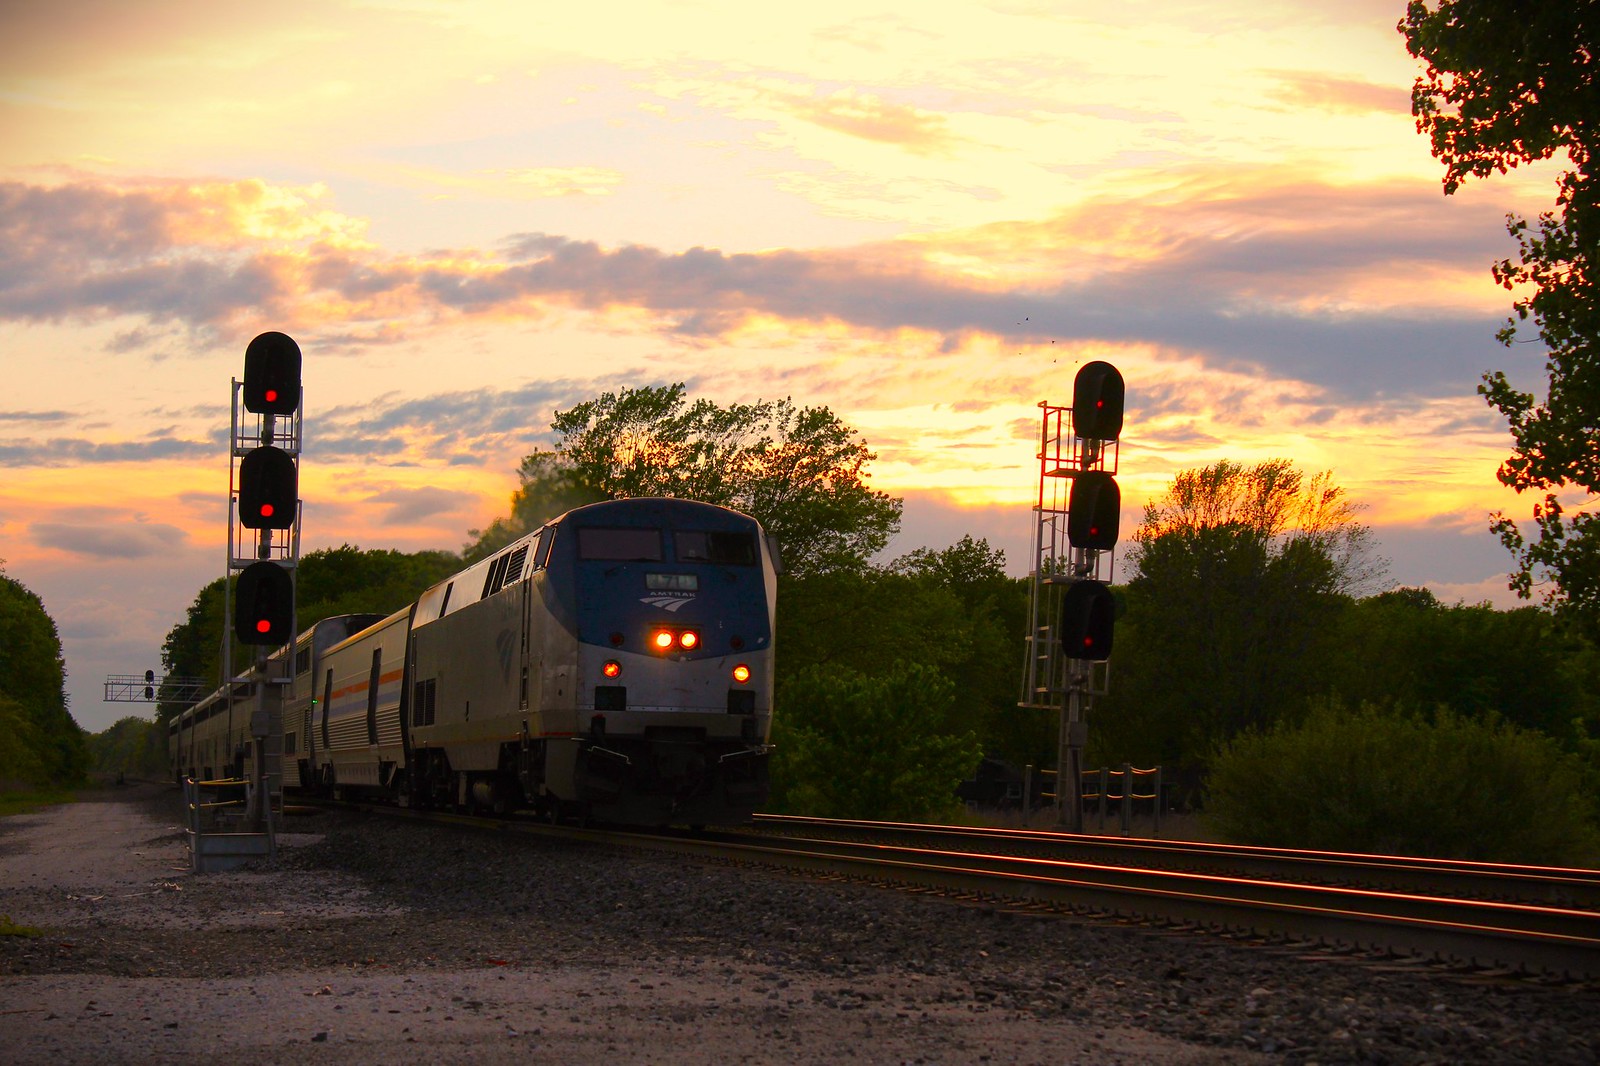 The "Capitol Limited"